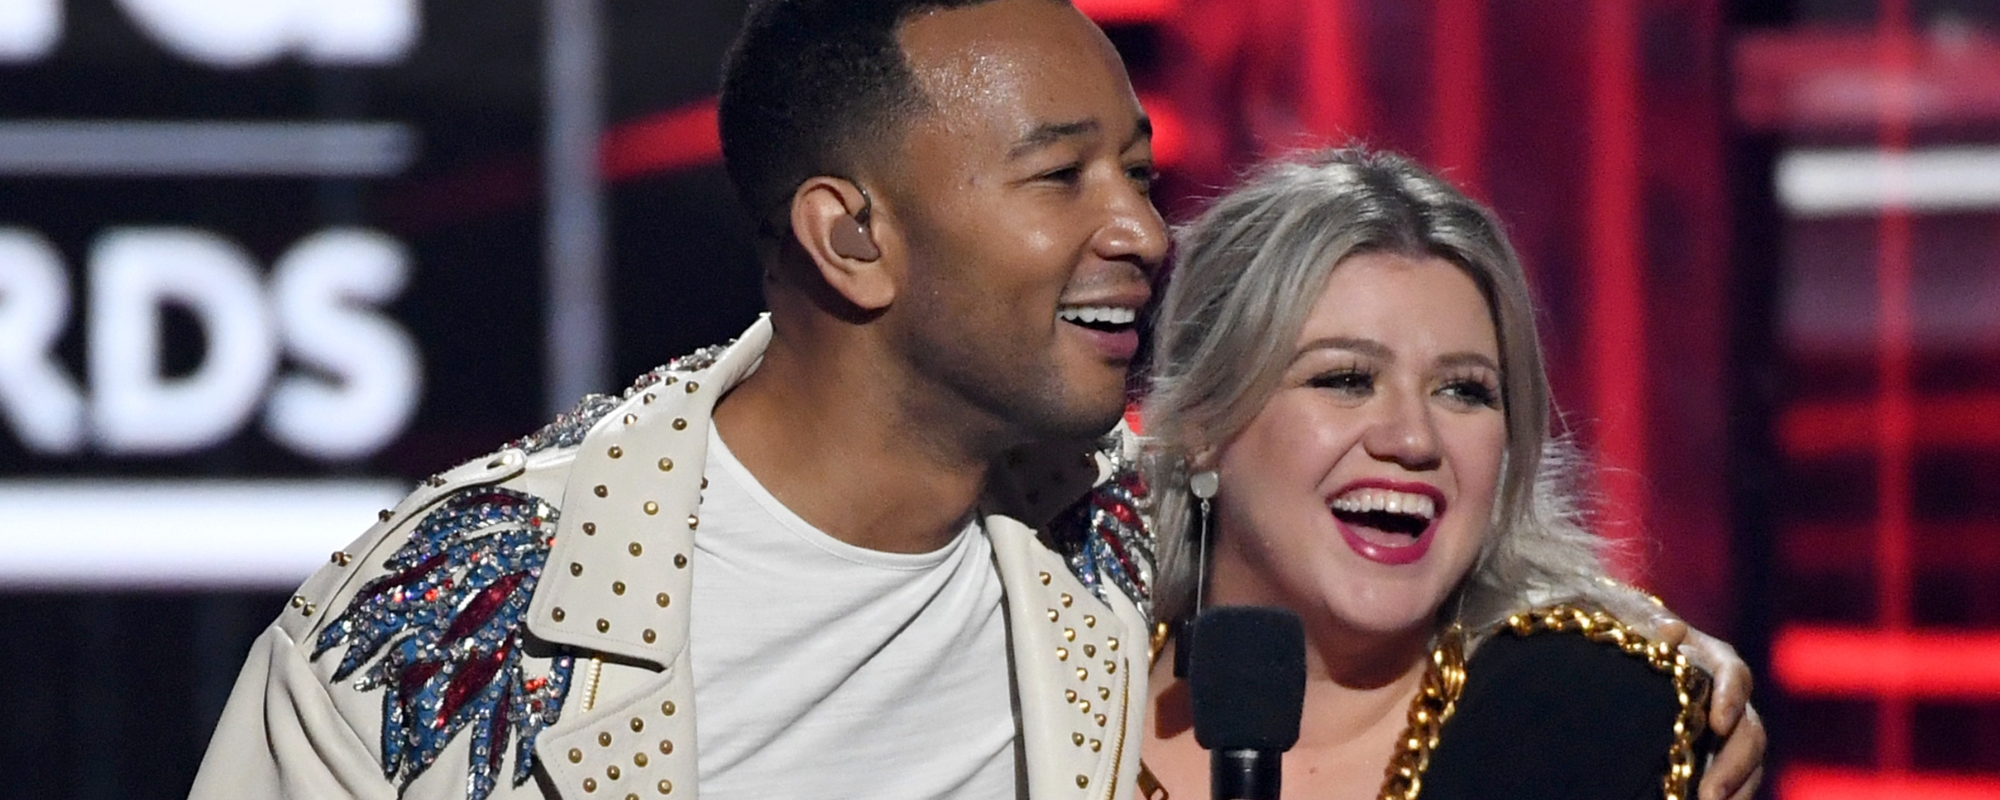 John Legend Wants Kelly Clarkson to Reprise Her Role as ‘The Voice’ Coach, Serve as His Double Chair Partner